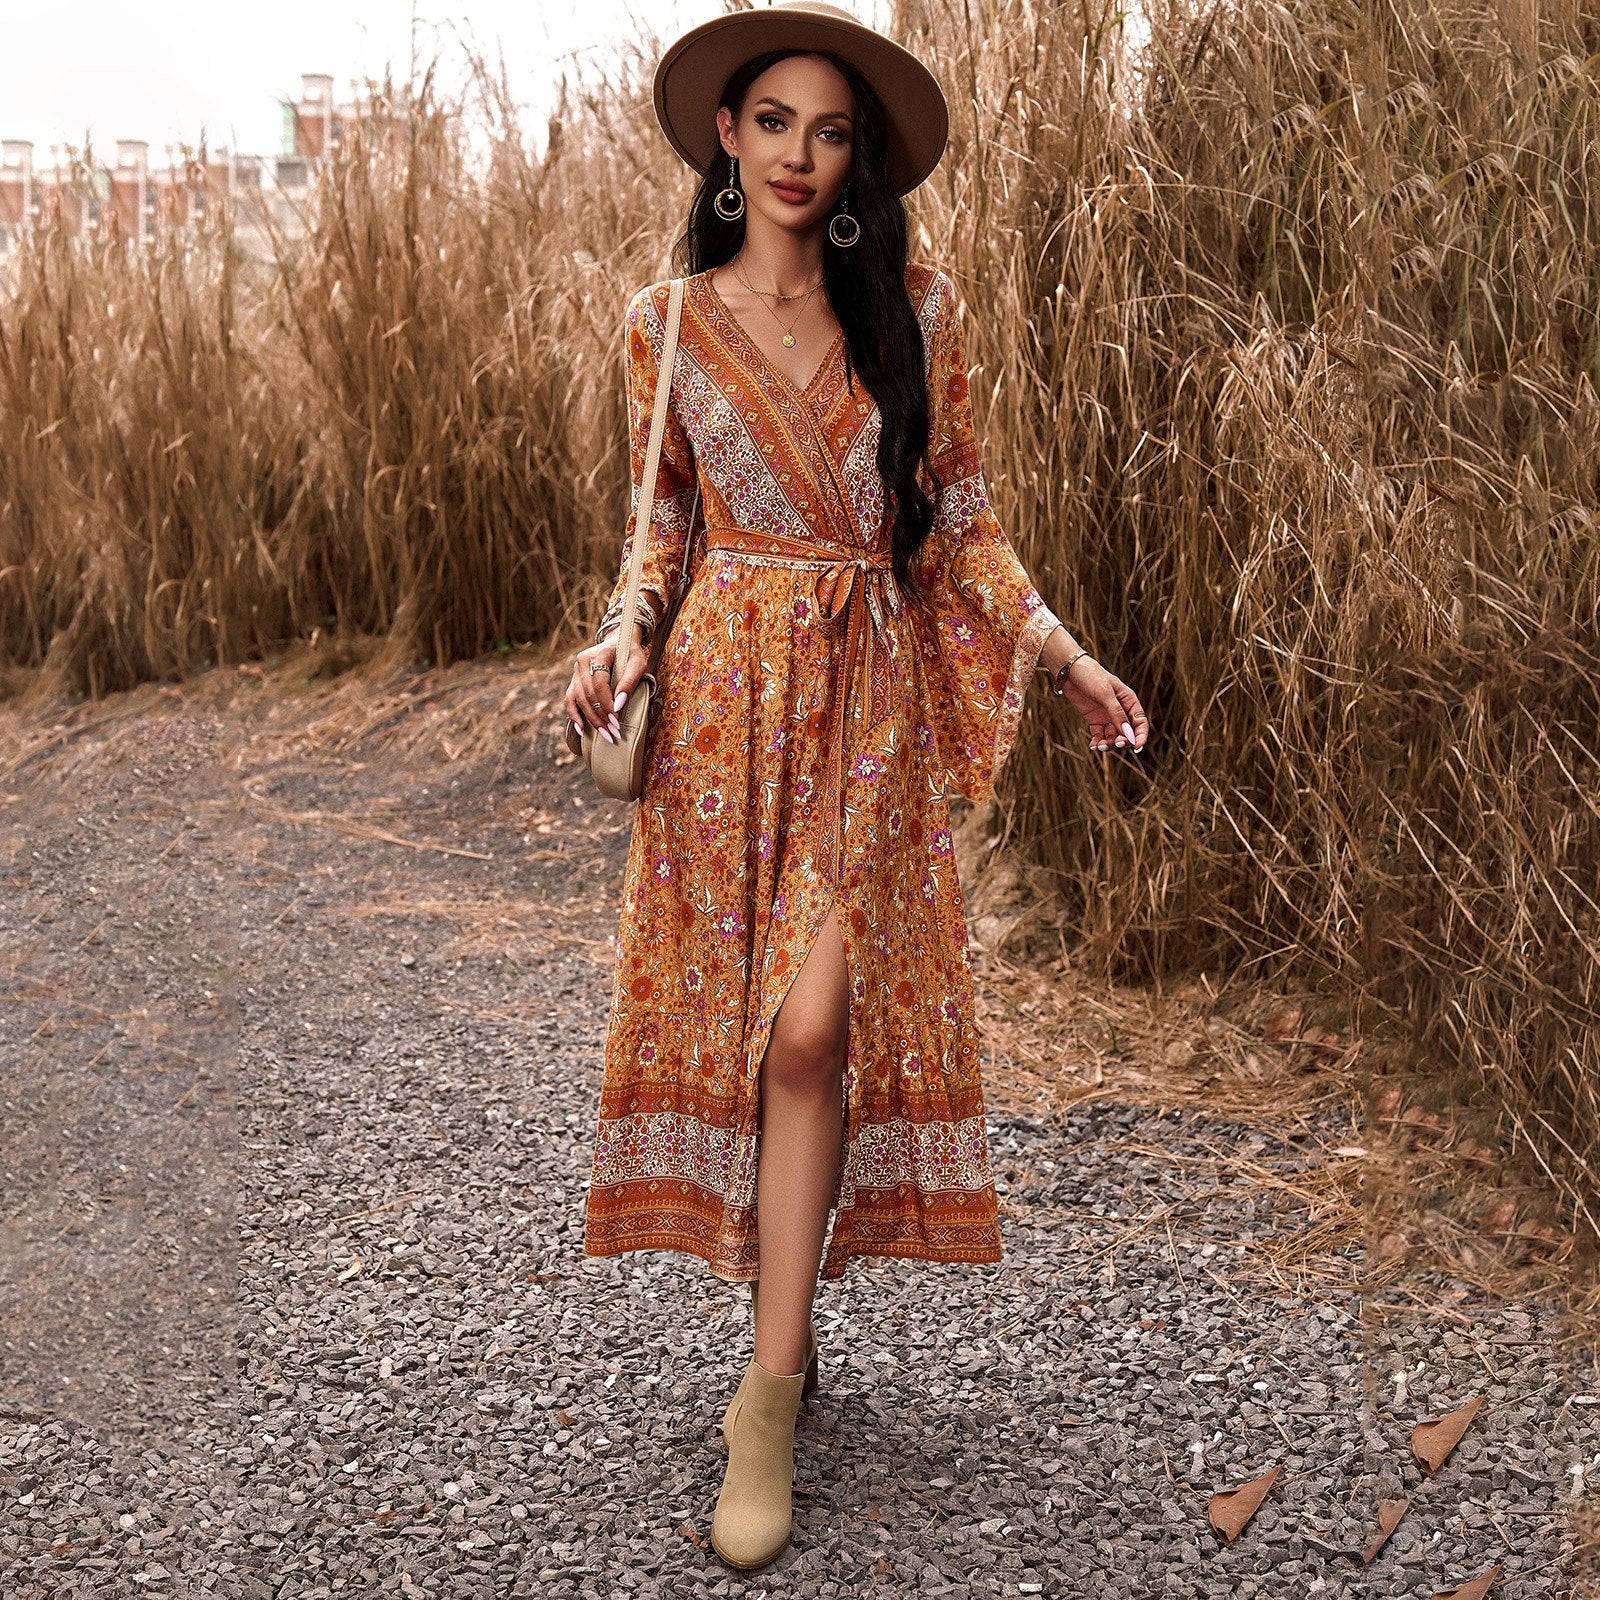 AB01DY Dress Amazon Cross-border 2023 Autumn And Winter Foreign Trade Temperament Casual Printed V-neck A- Line Dress